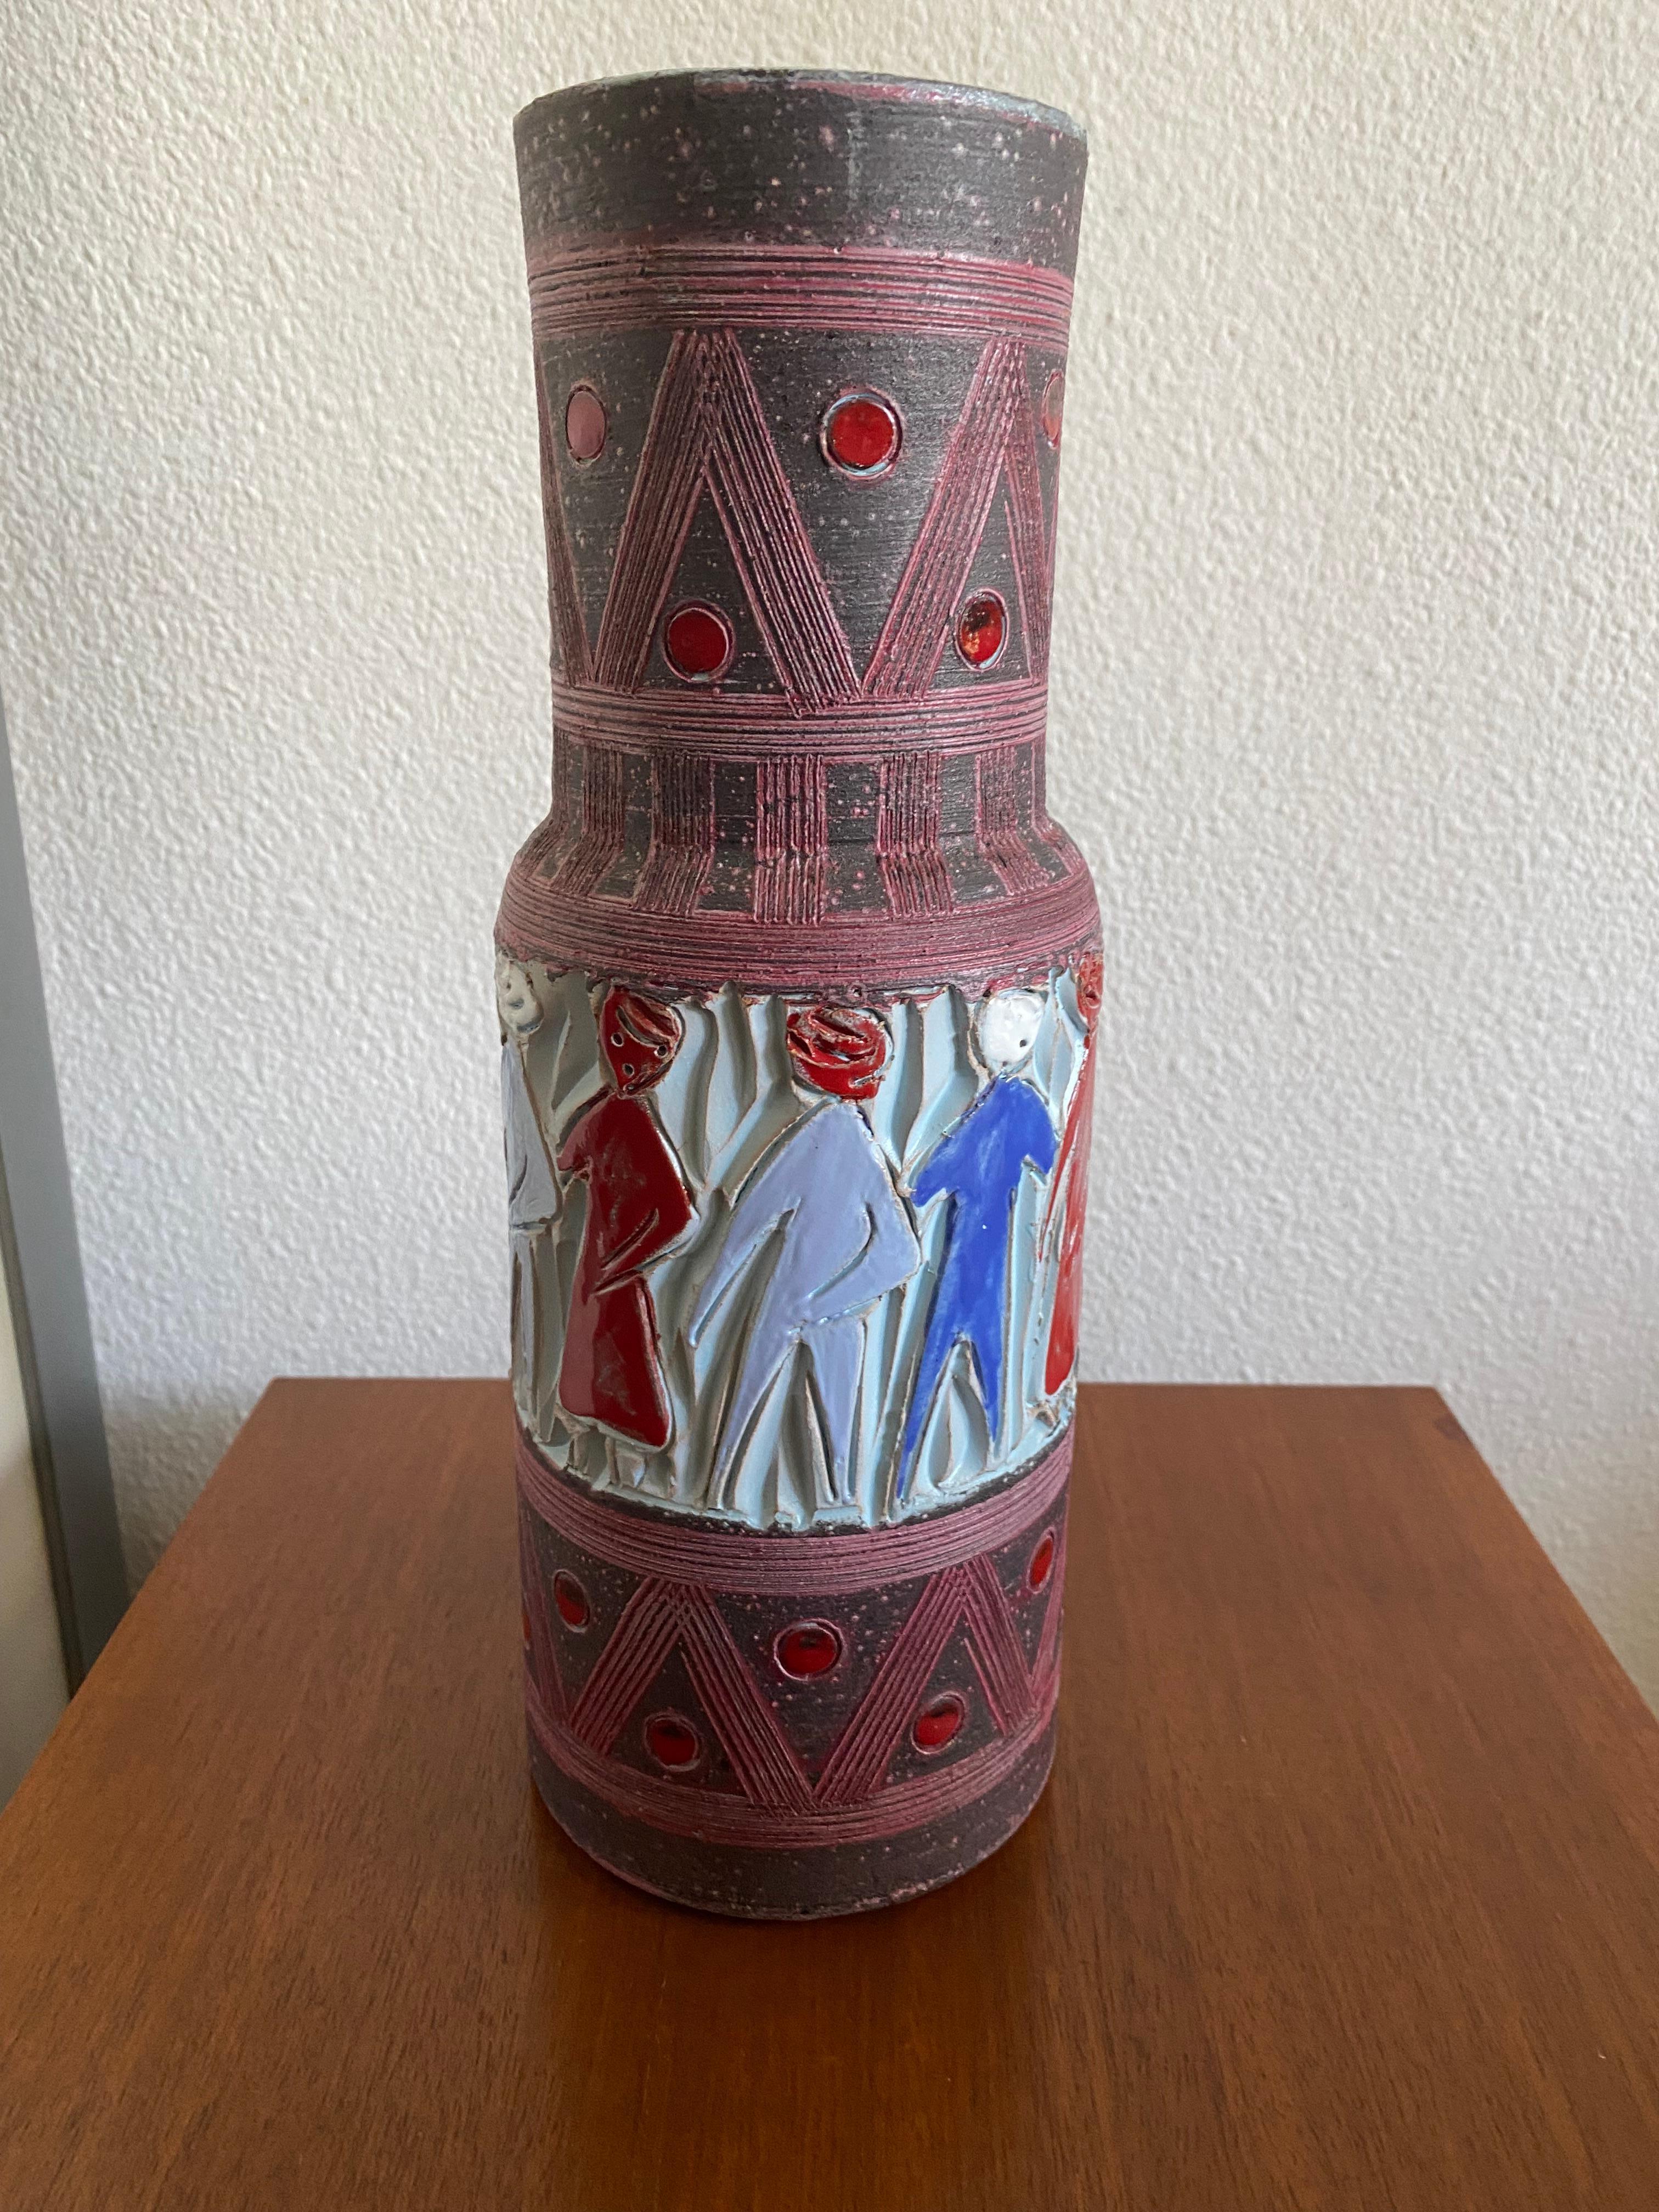 Stunning and vibrant, 38cm high, vase with sgrafitto and hand-painted colored glossy pattern. On the base is painted Italy 8614.

Fratelli Fanciullacci Pottery: during the first half of the 20th century the firm slowly branched out into a rich